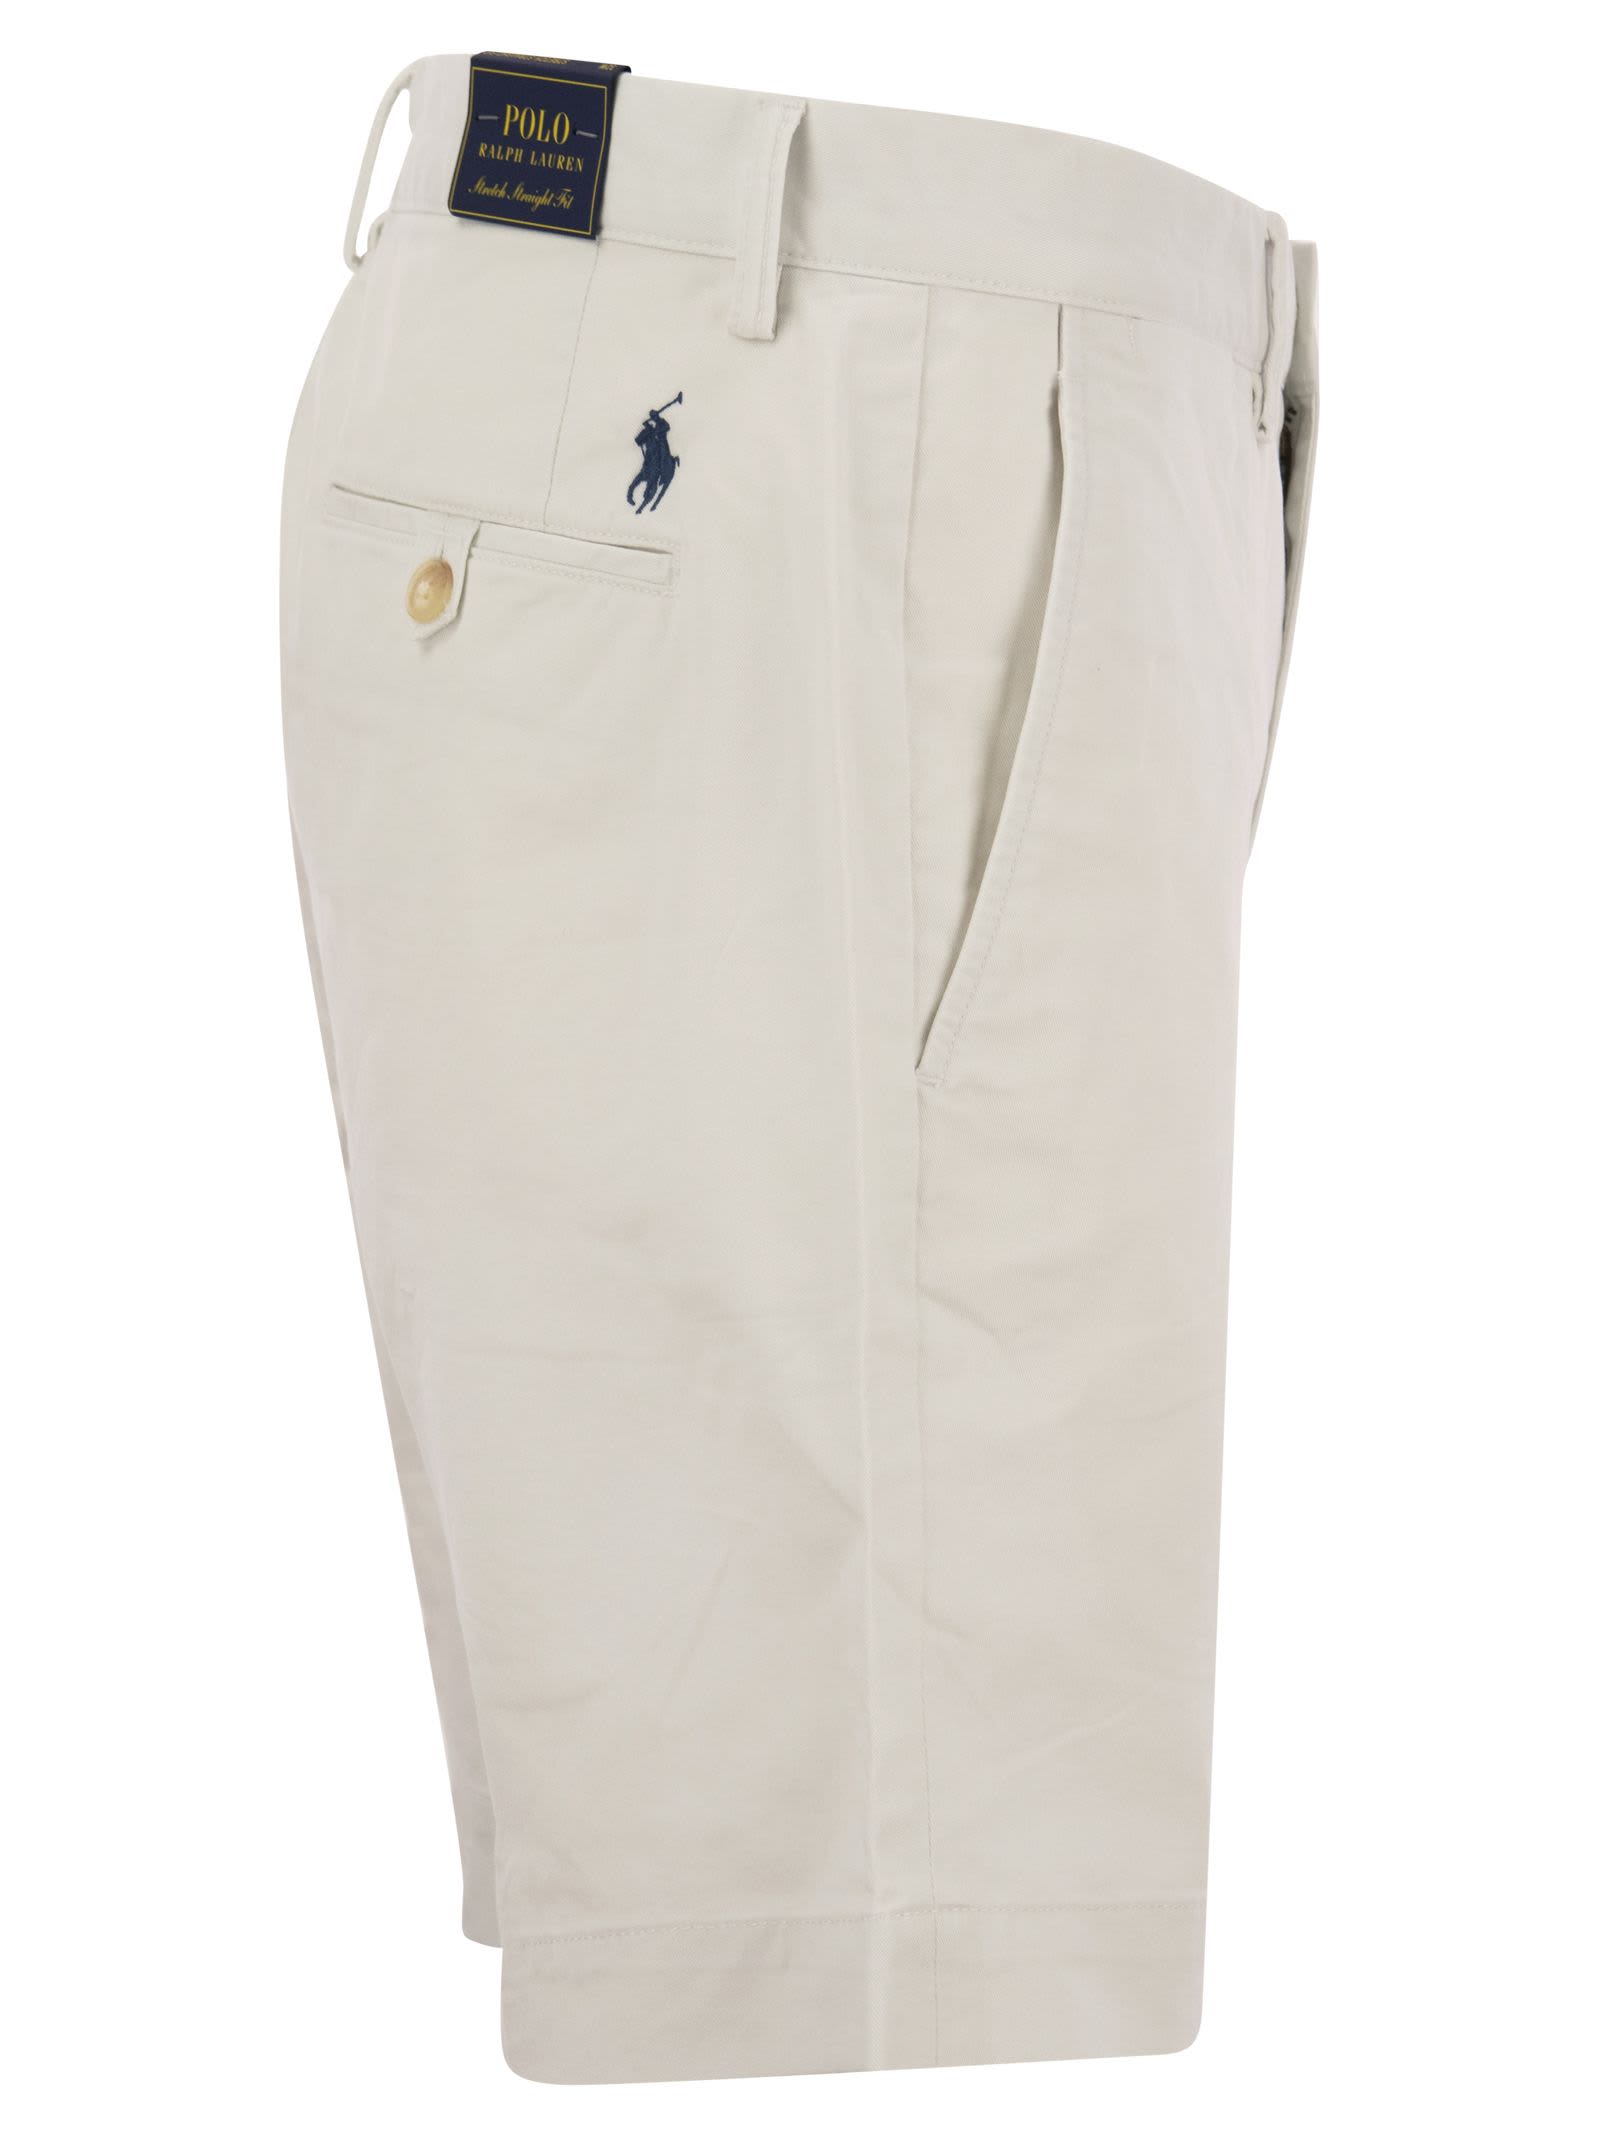 Shop Polo Ralph Lauren Stretch Classic Fit Chino Short In White